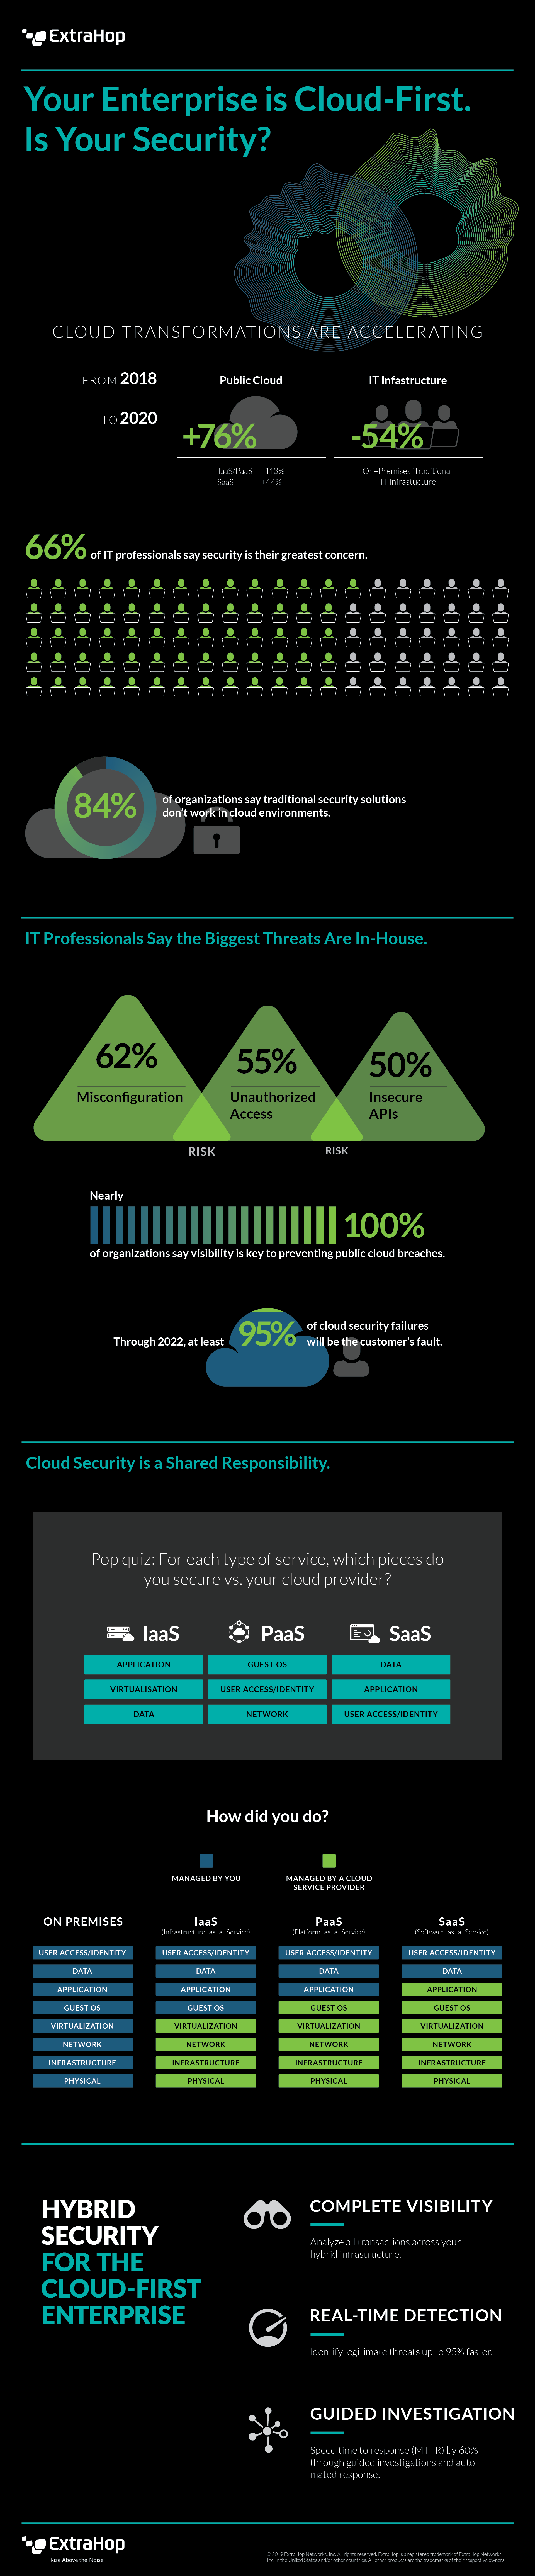 Cloud-First Security Infographic